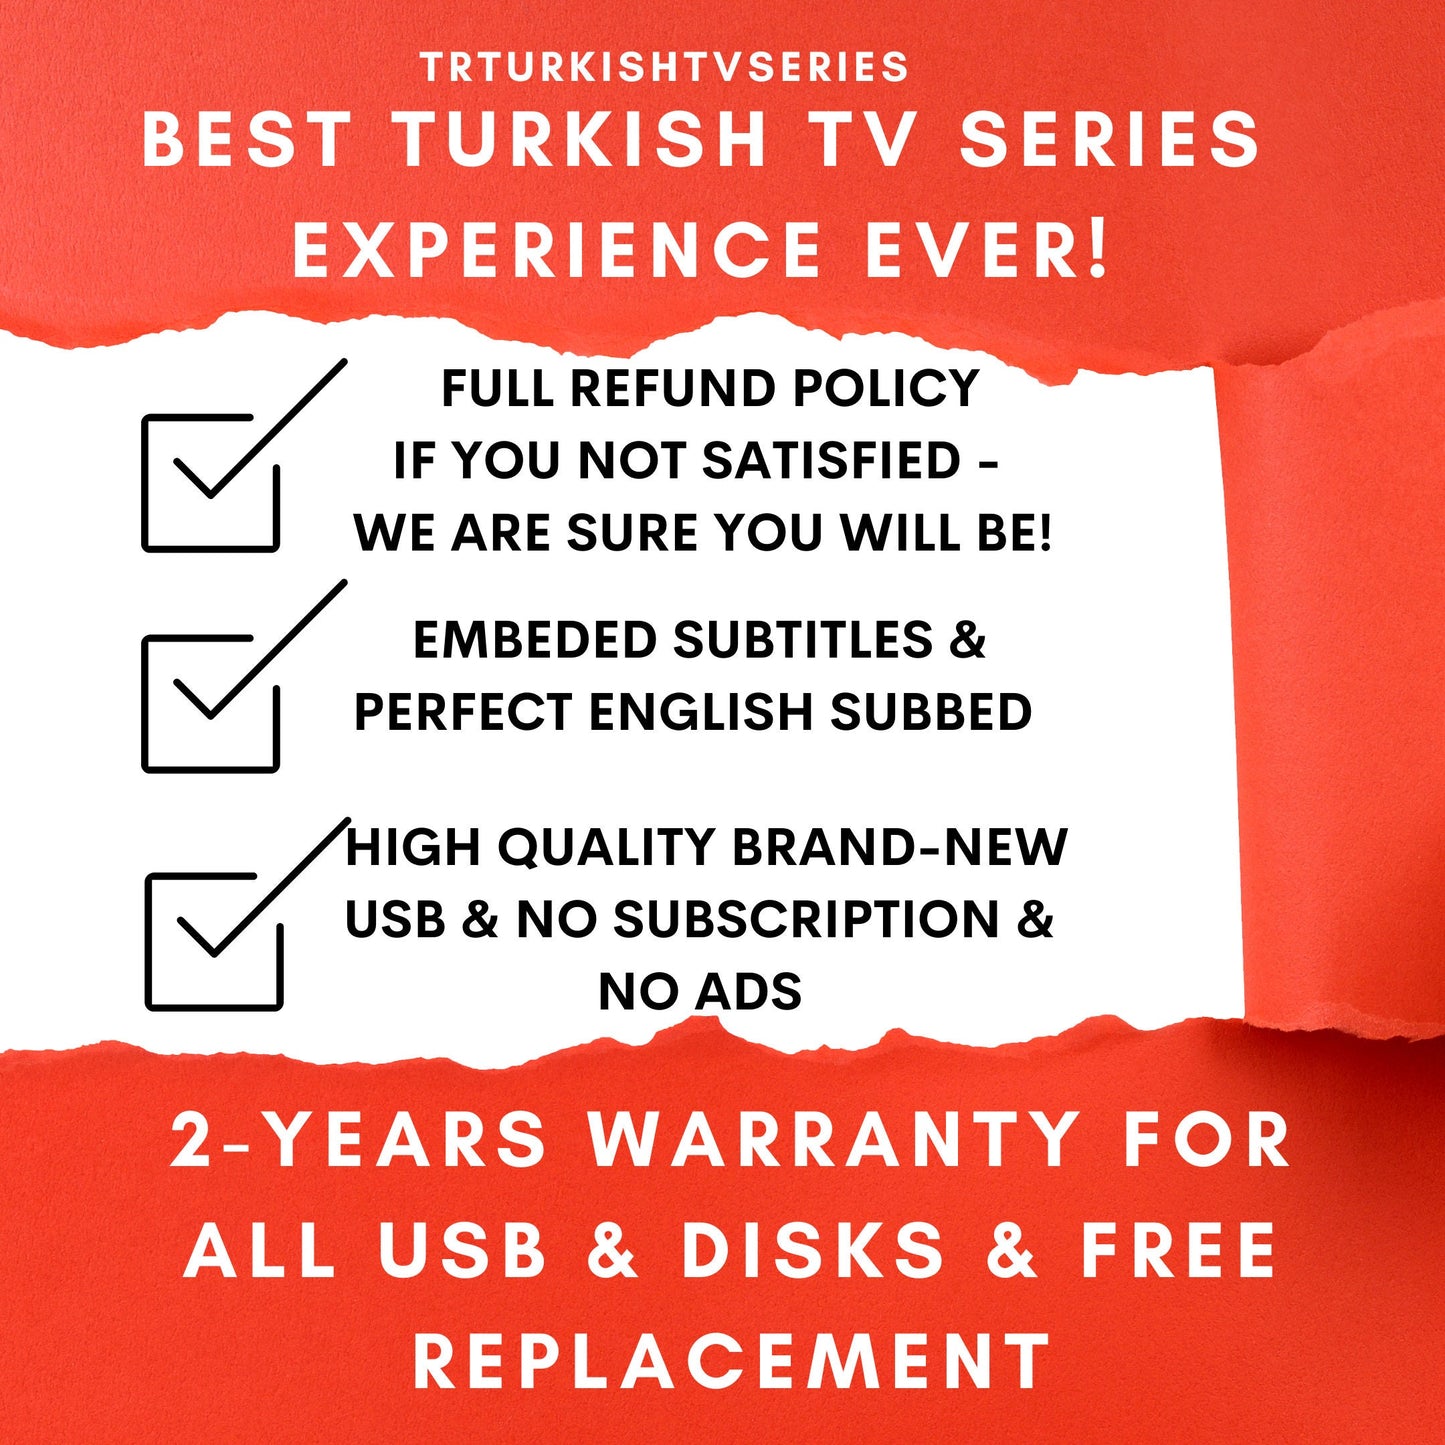 Muhtesem Yuzyil (Magnificent Century) Complete Series | All Seasons, 139 Episodes in Full HD with English Subtitles on USB | Ad-Free